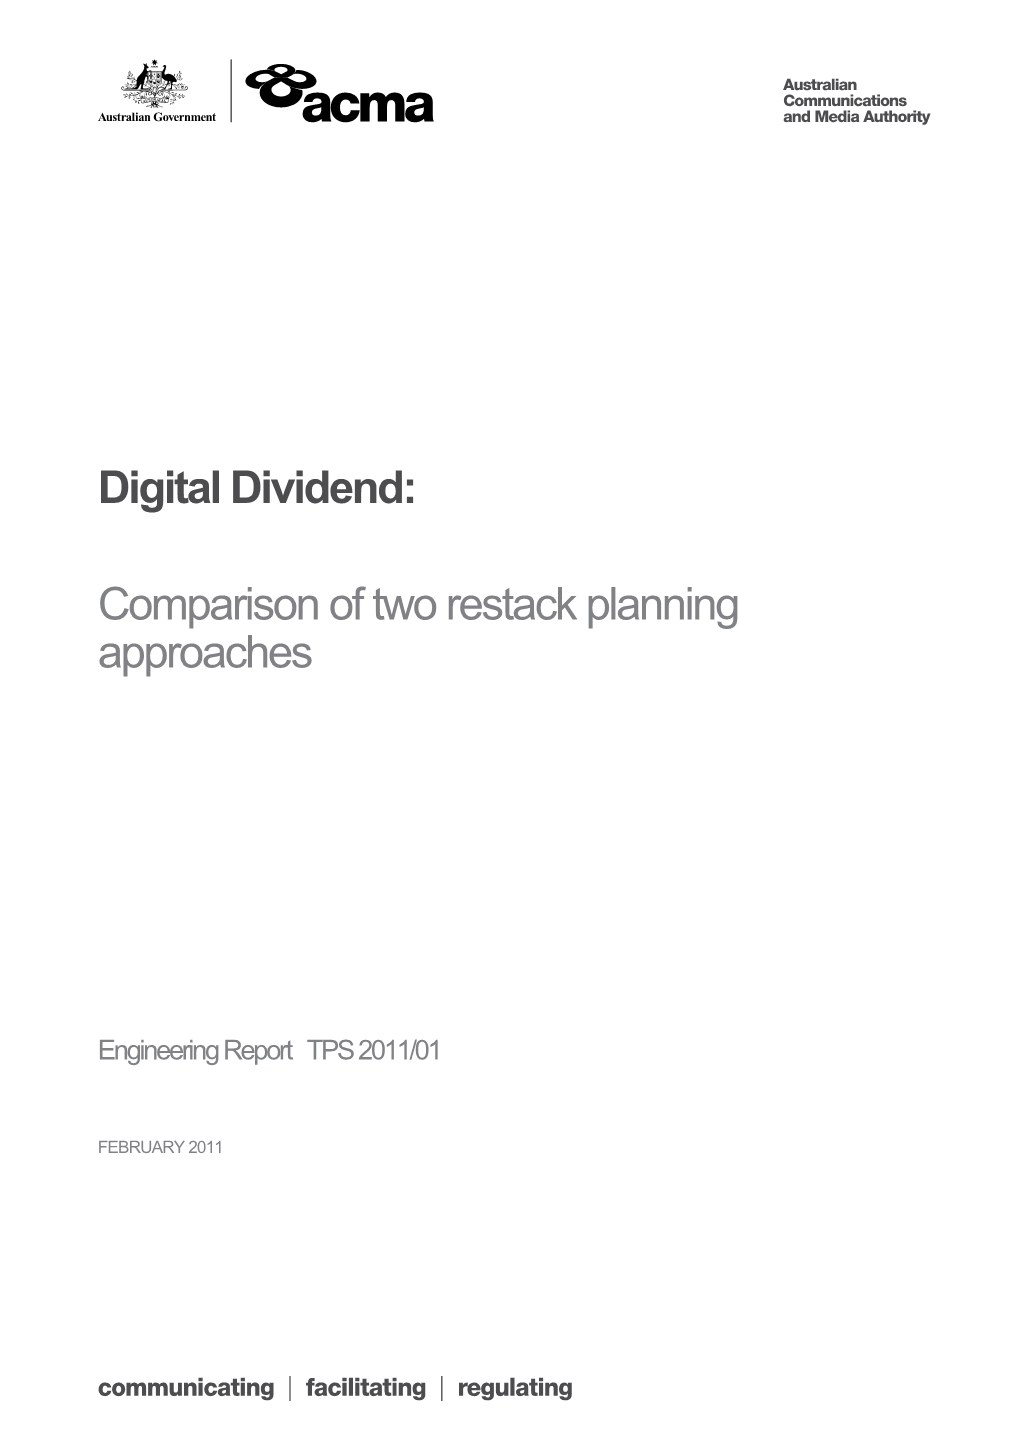 Digital Dividend: Comparison of Two Restack Planning Approaches